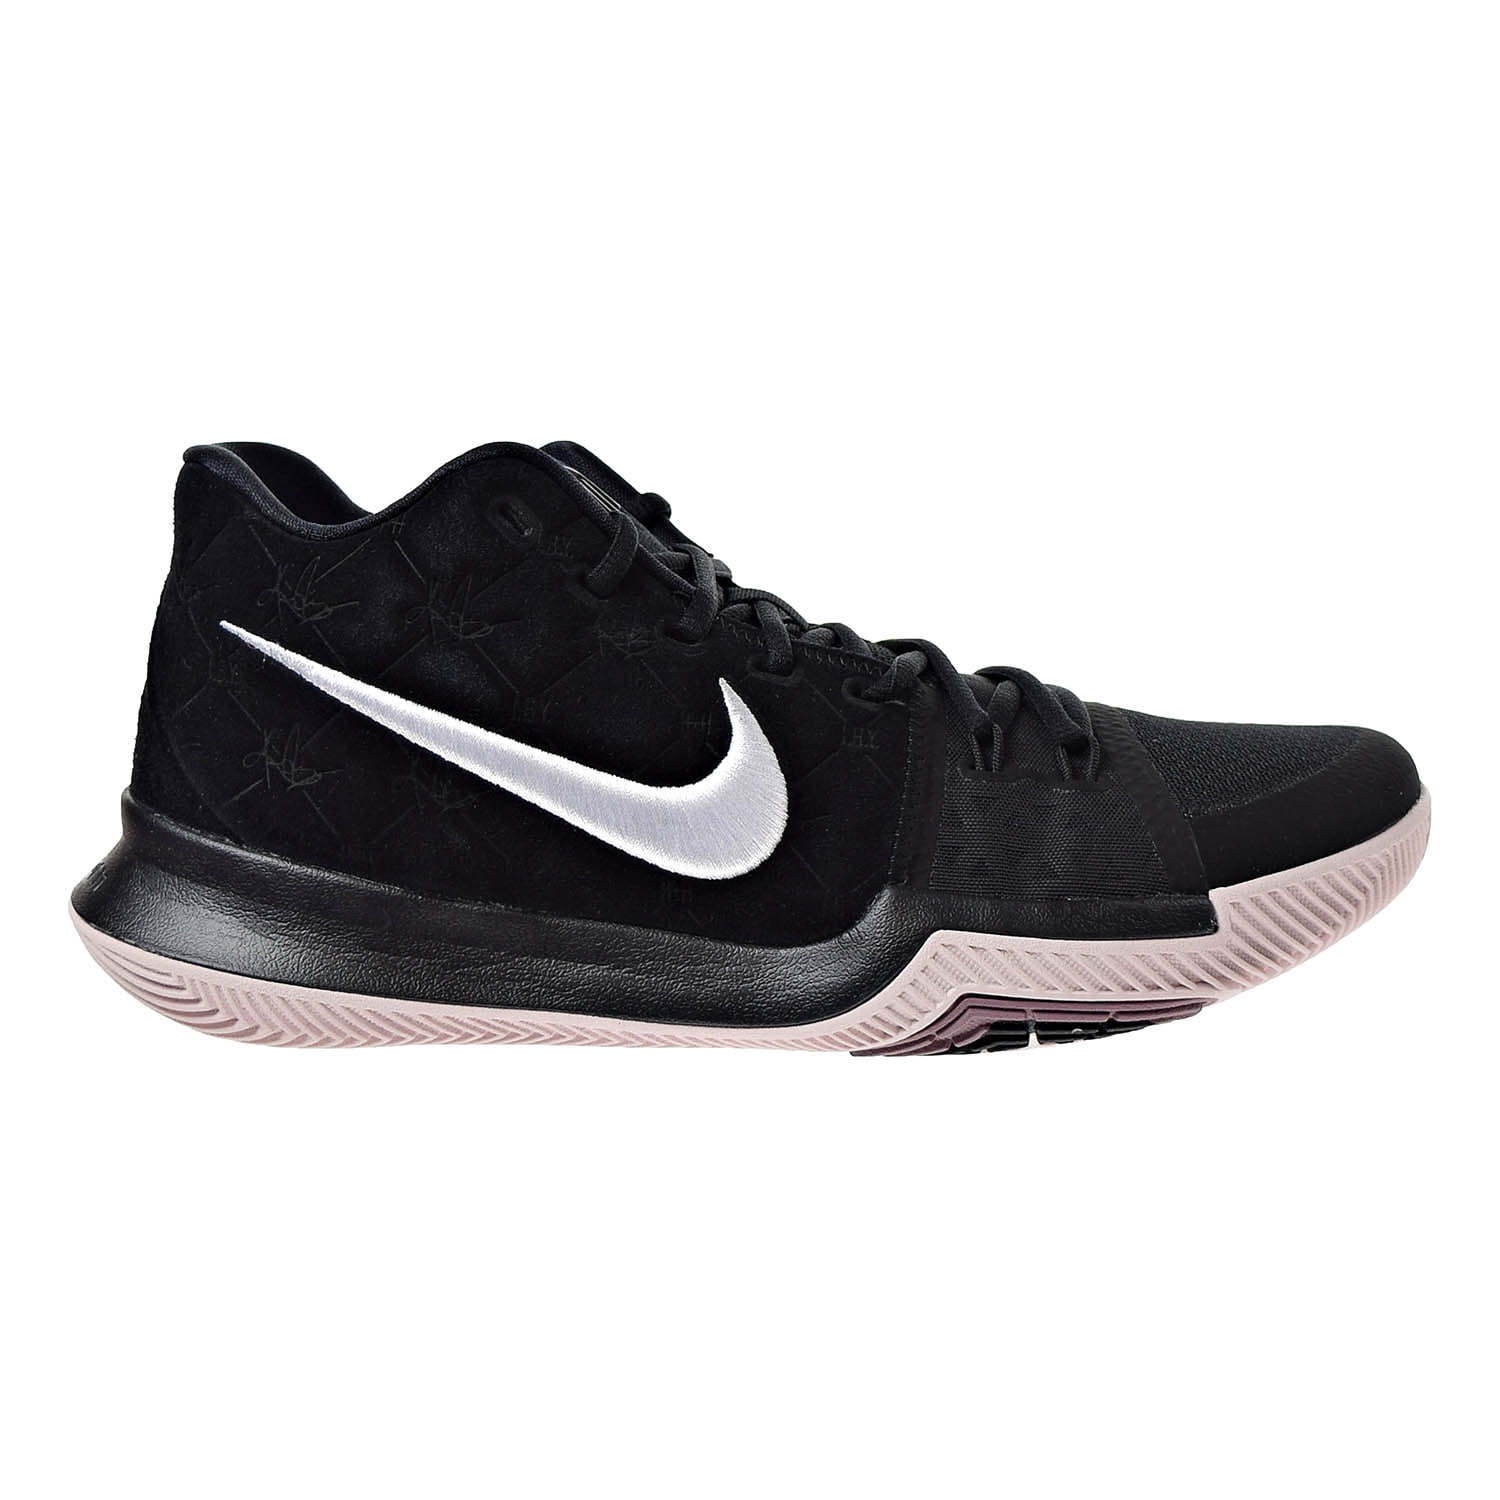 kyrie 3 mens shoes